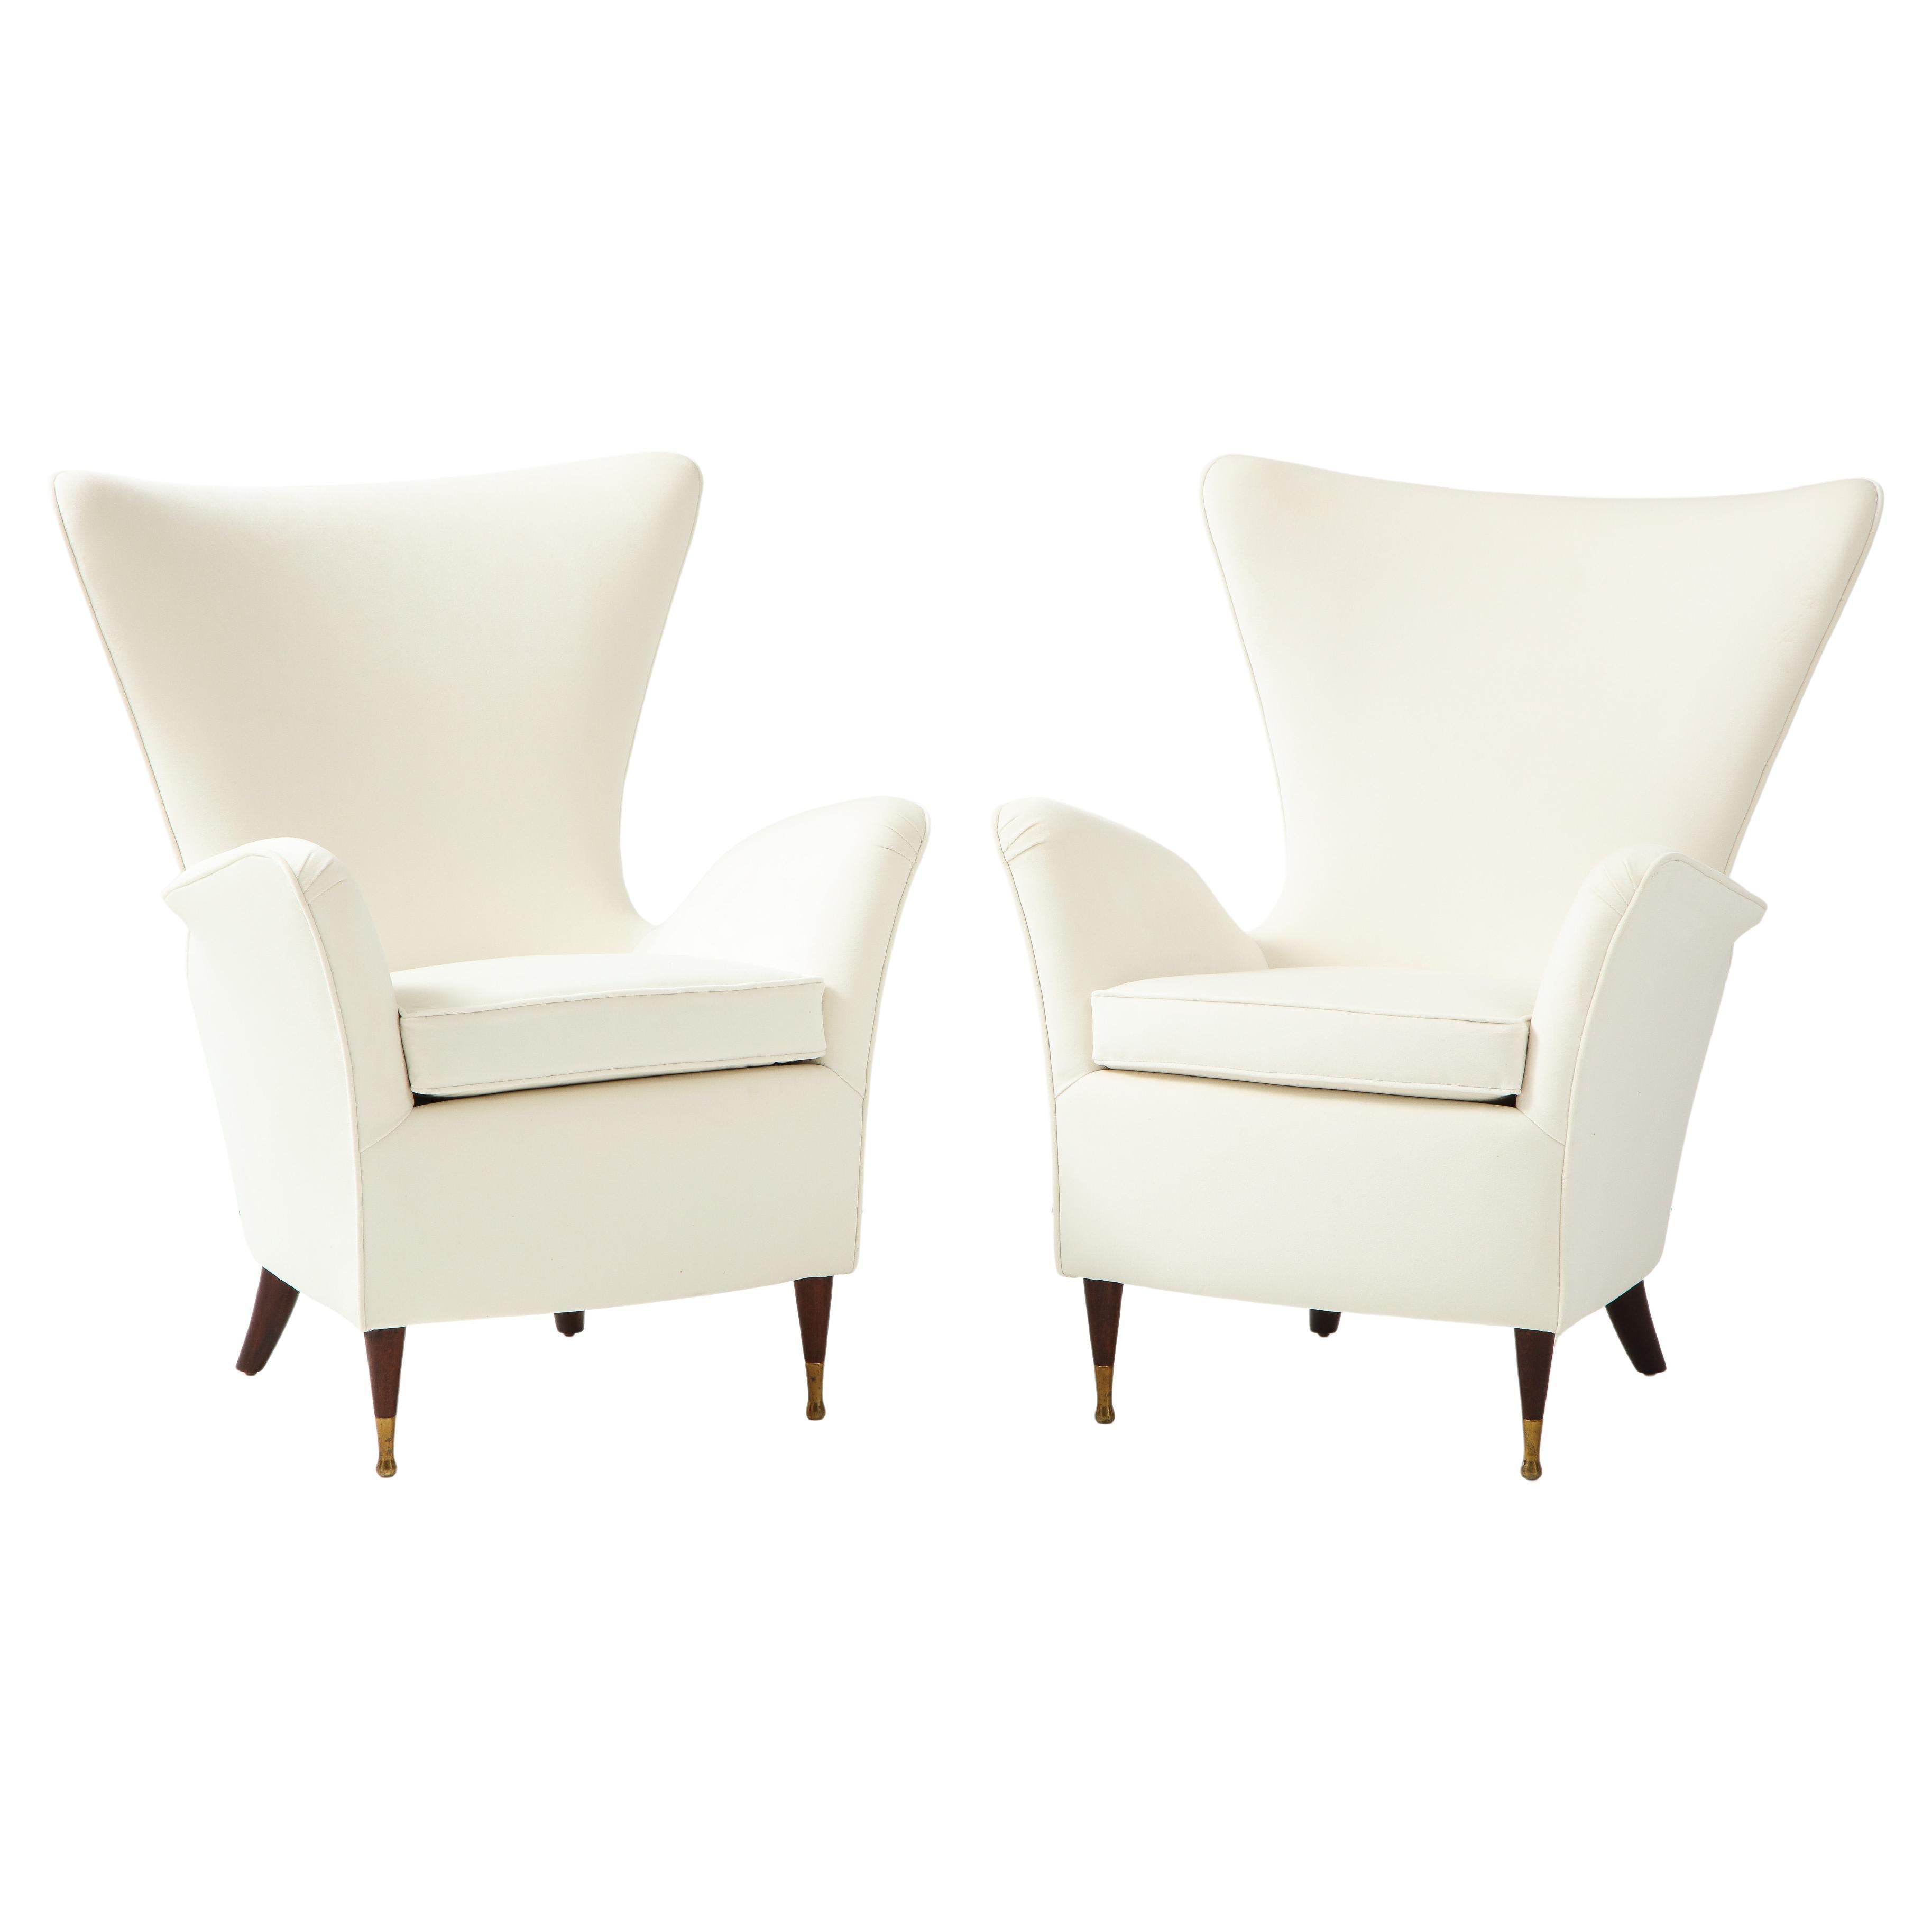 Pair of Italian 1950's Wing High Back Armchairs For Sale